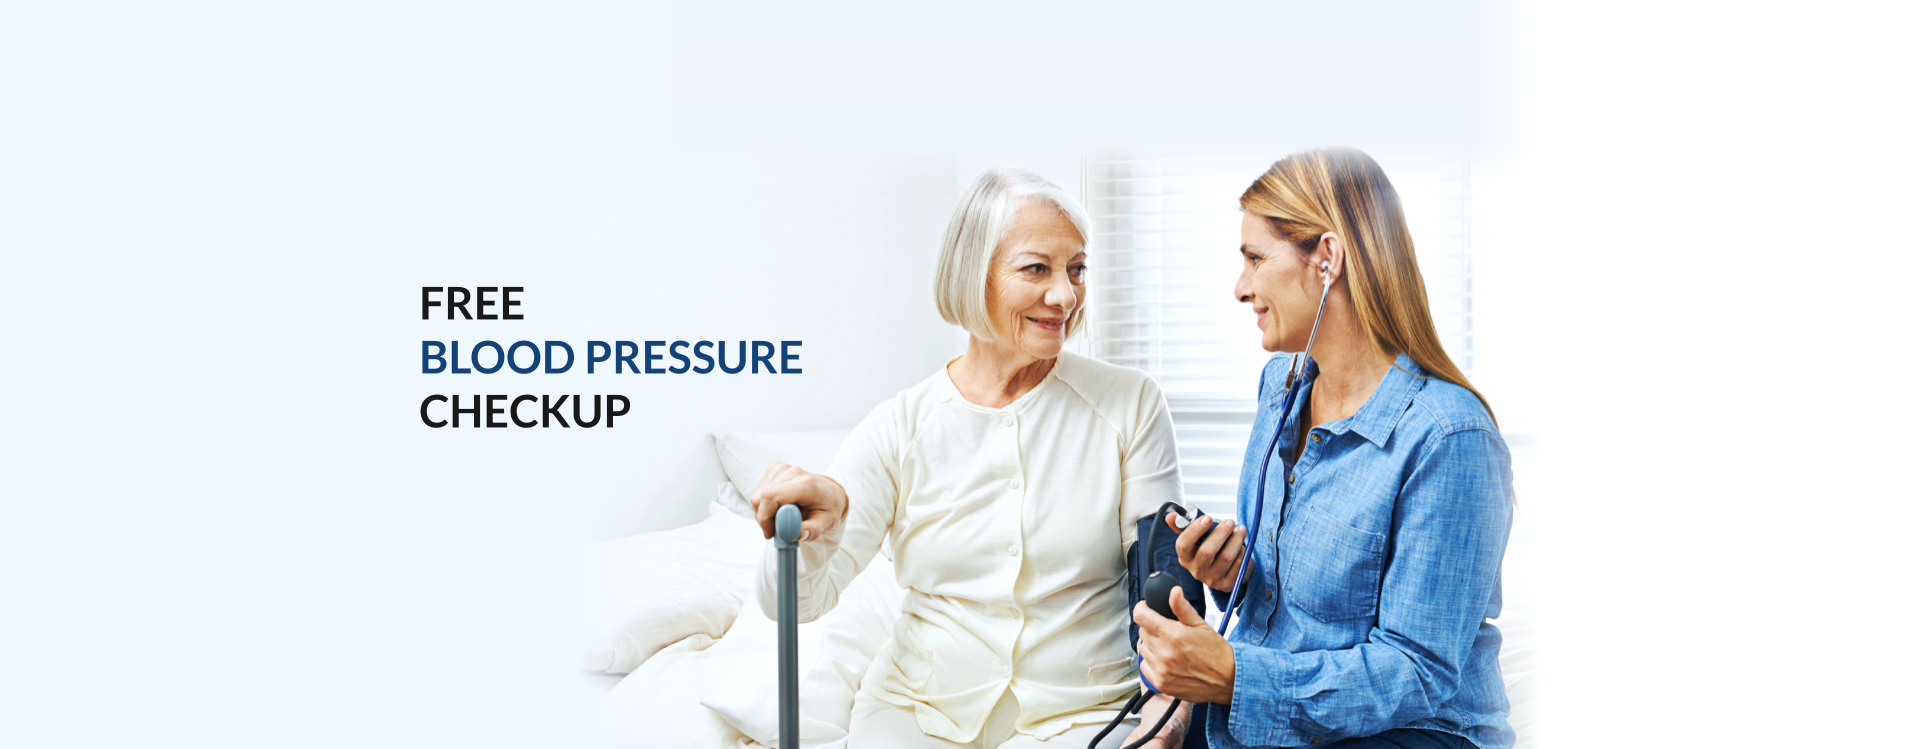 nurse checked the blood pressure of the elderly woman